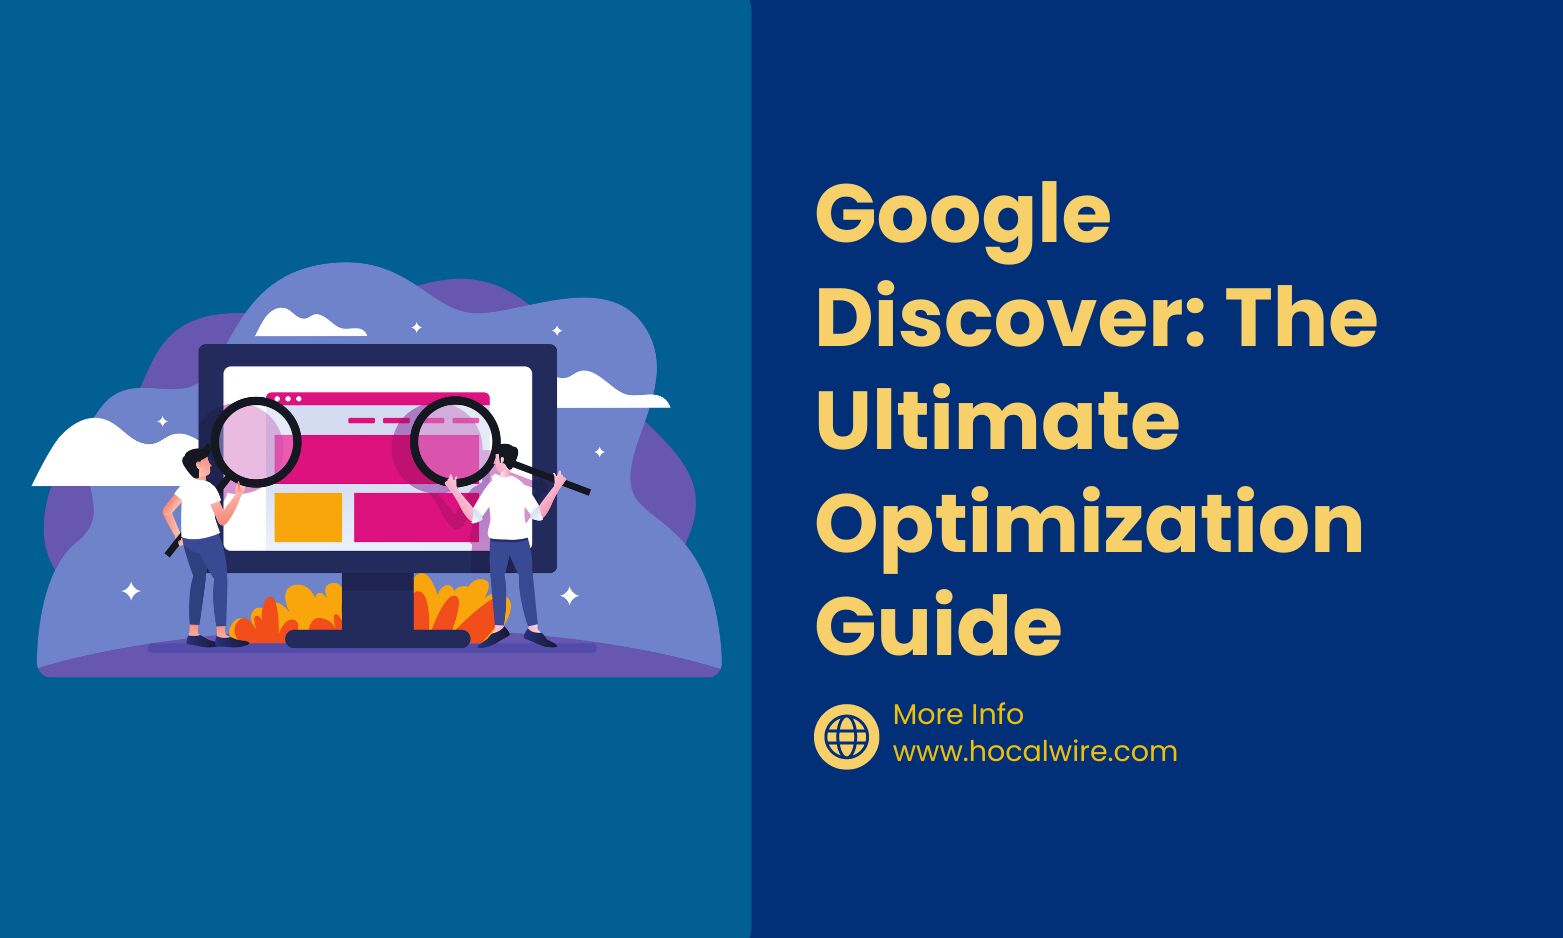 Google Discover: The Ultimate Optimization Guide